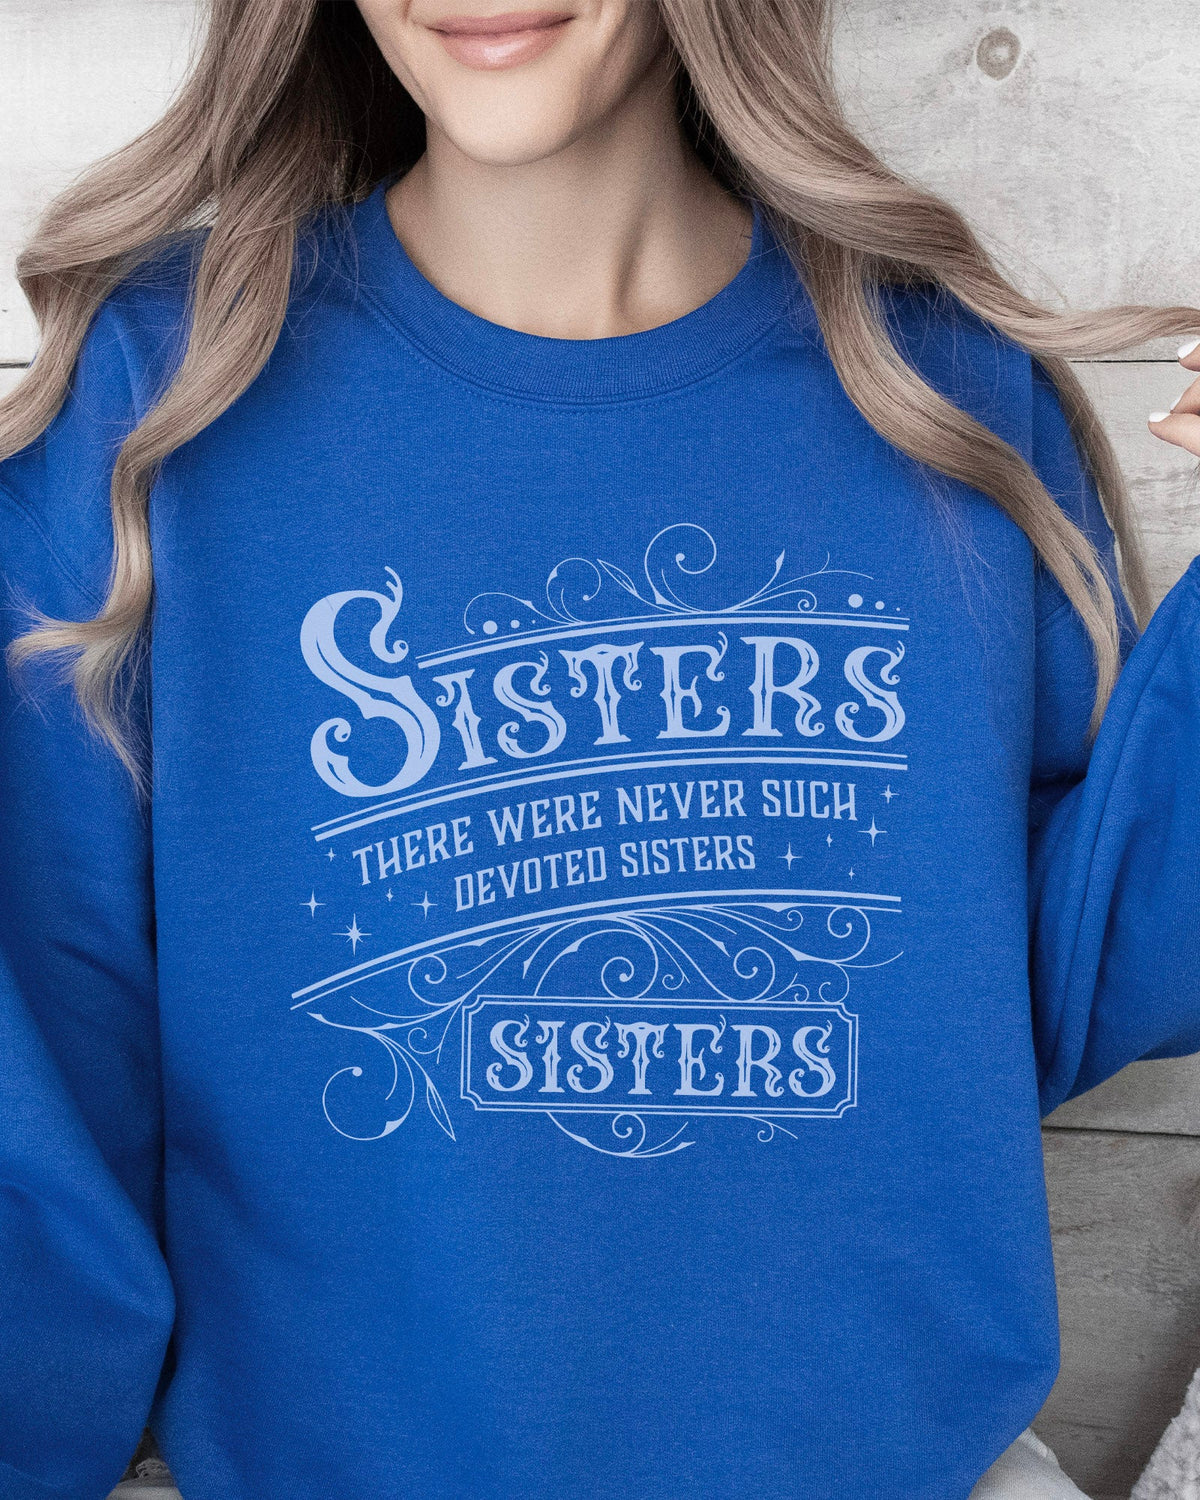 There Were Never Such Devoted Sisters Sweatshirt *BEST SELLER*